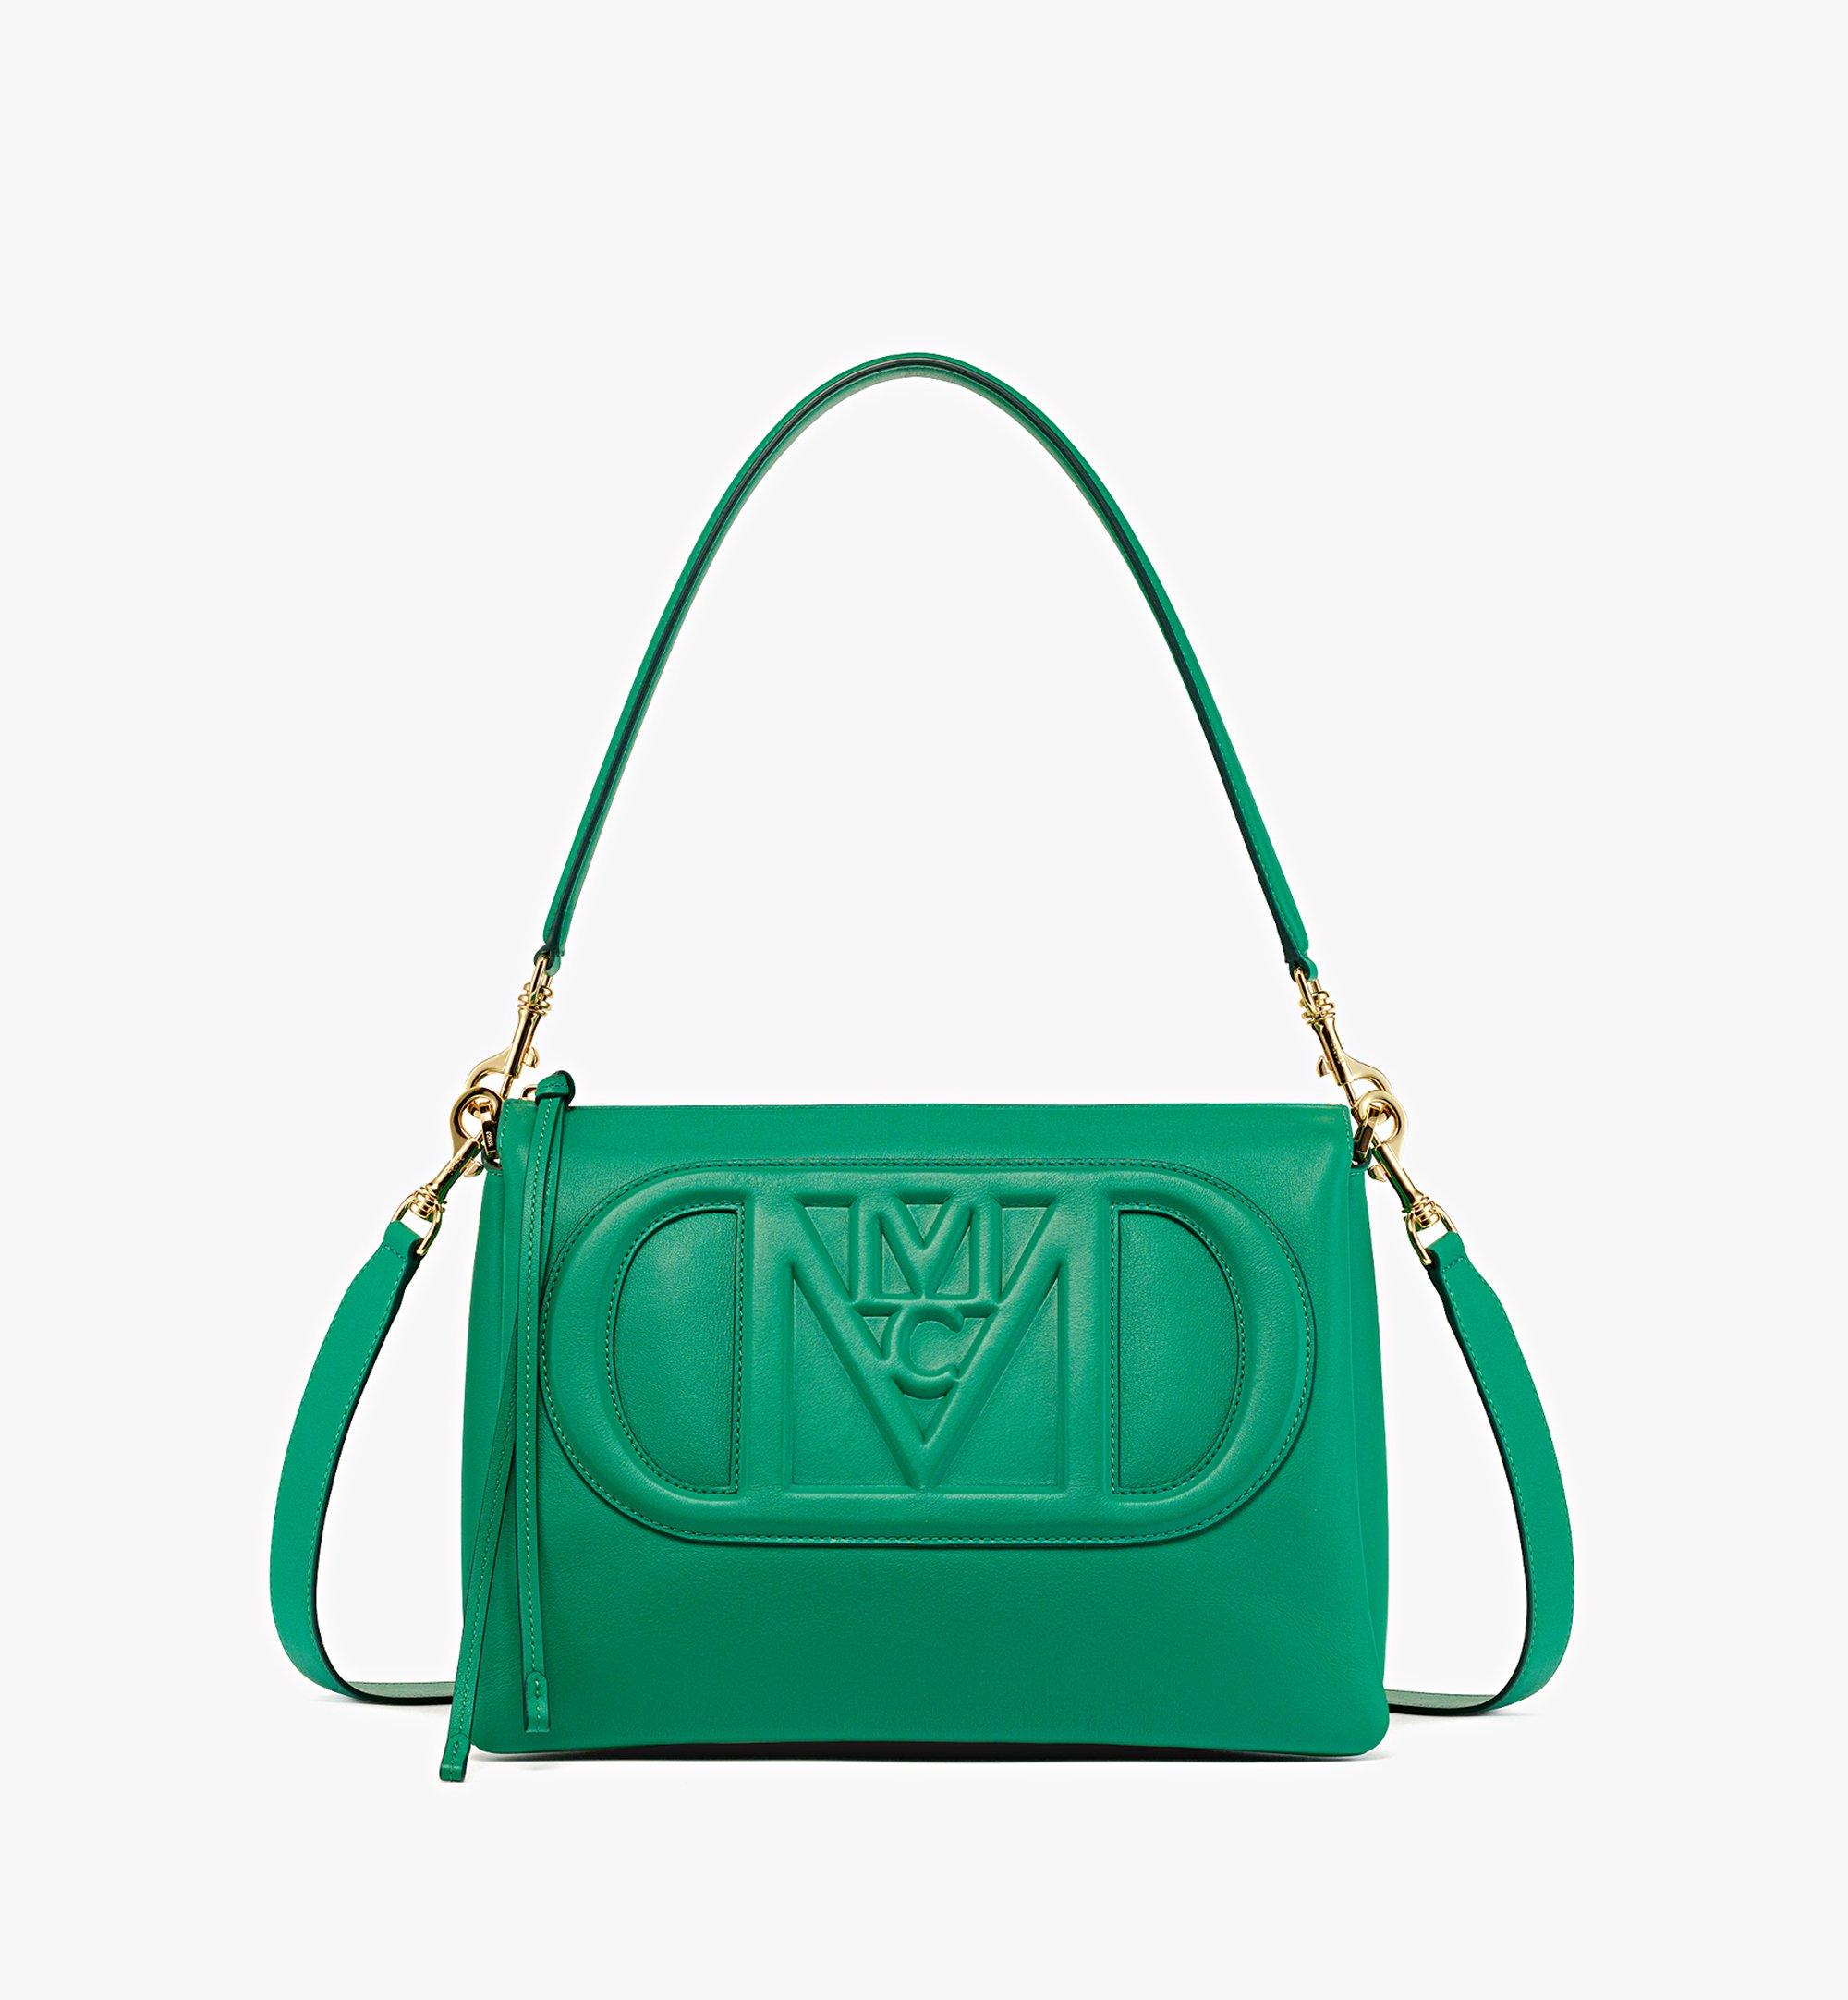 MCM Mode Travia Shoulder Bag in Spanish Calf Leather Green MWRDALD02J8001 Alternate View 1